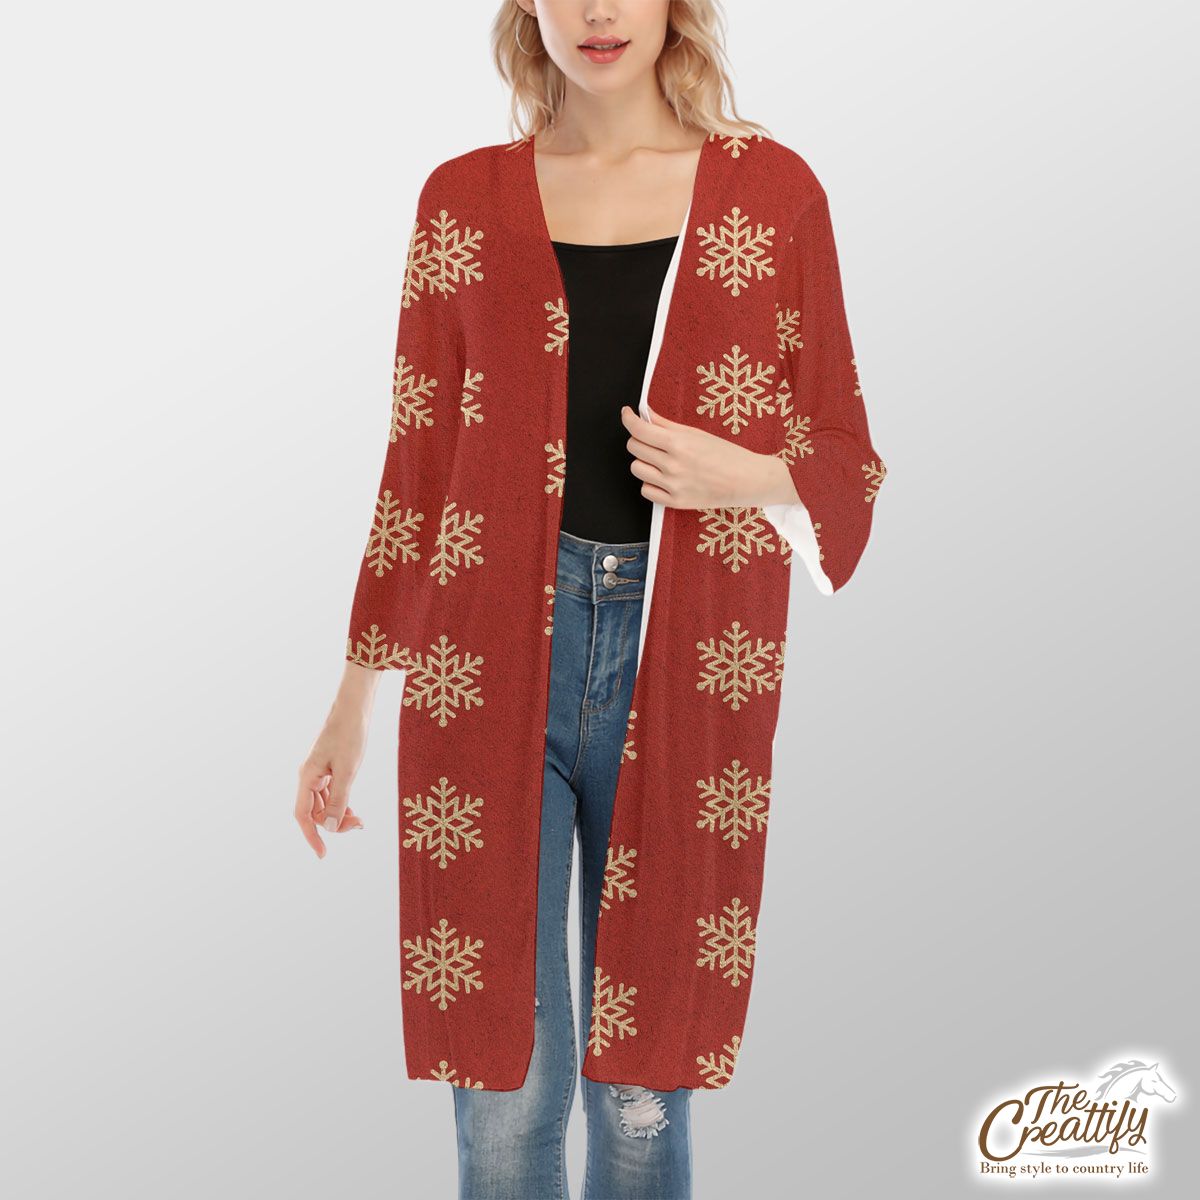 Snowflake Pattern, Christmas Snowflakes, Christmas Present Ideas On Red Background V-Neck Mesh Cardigan